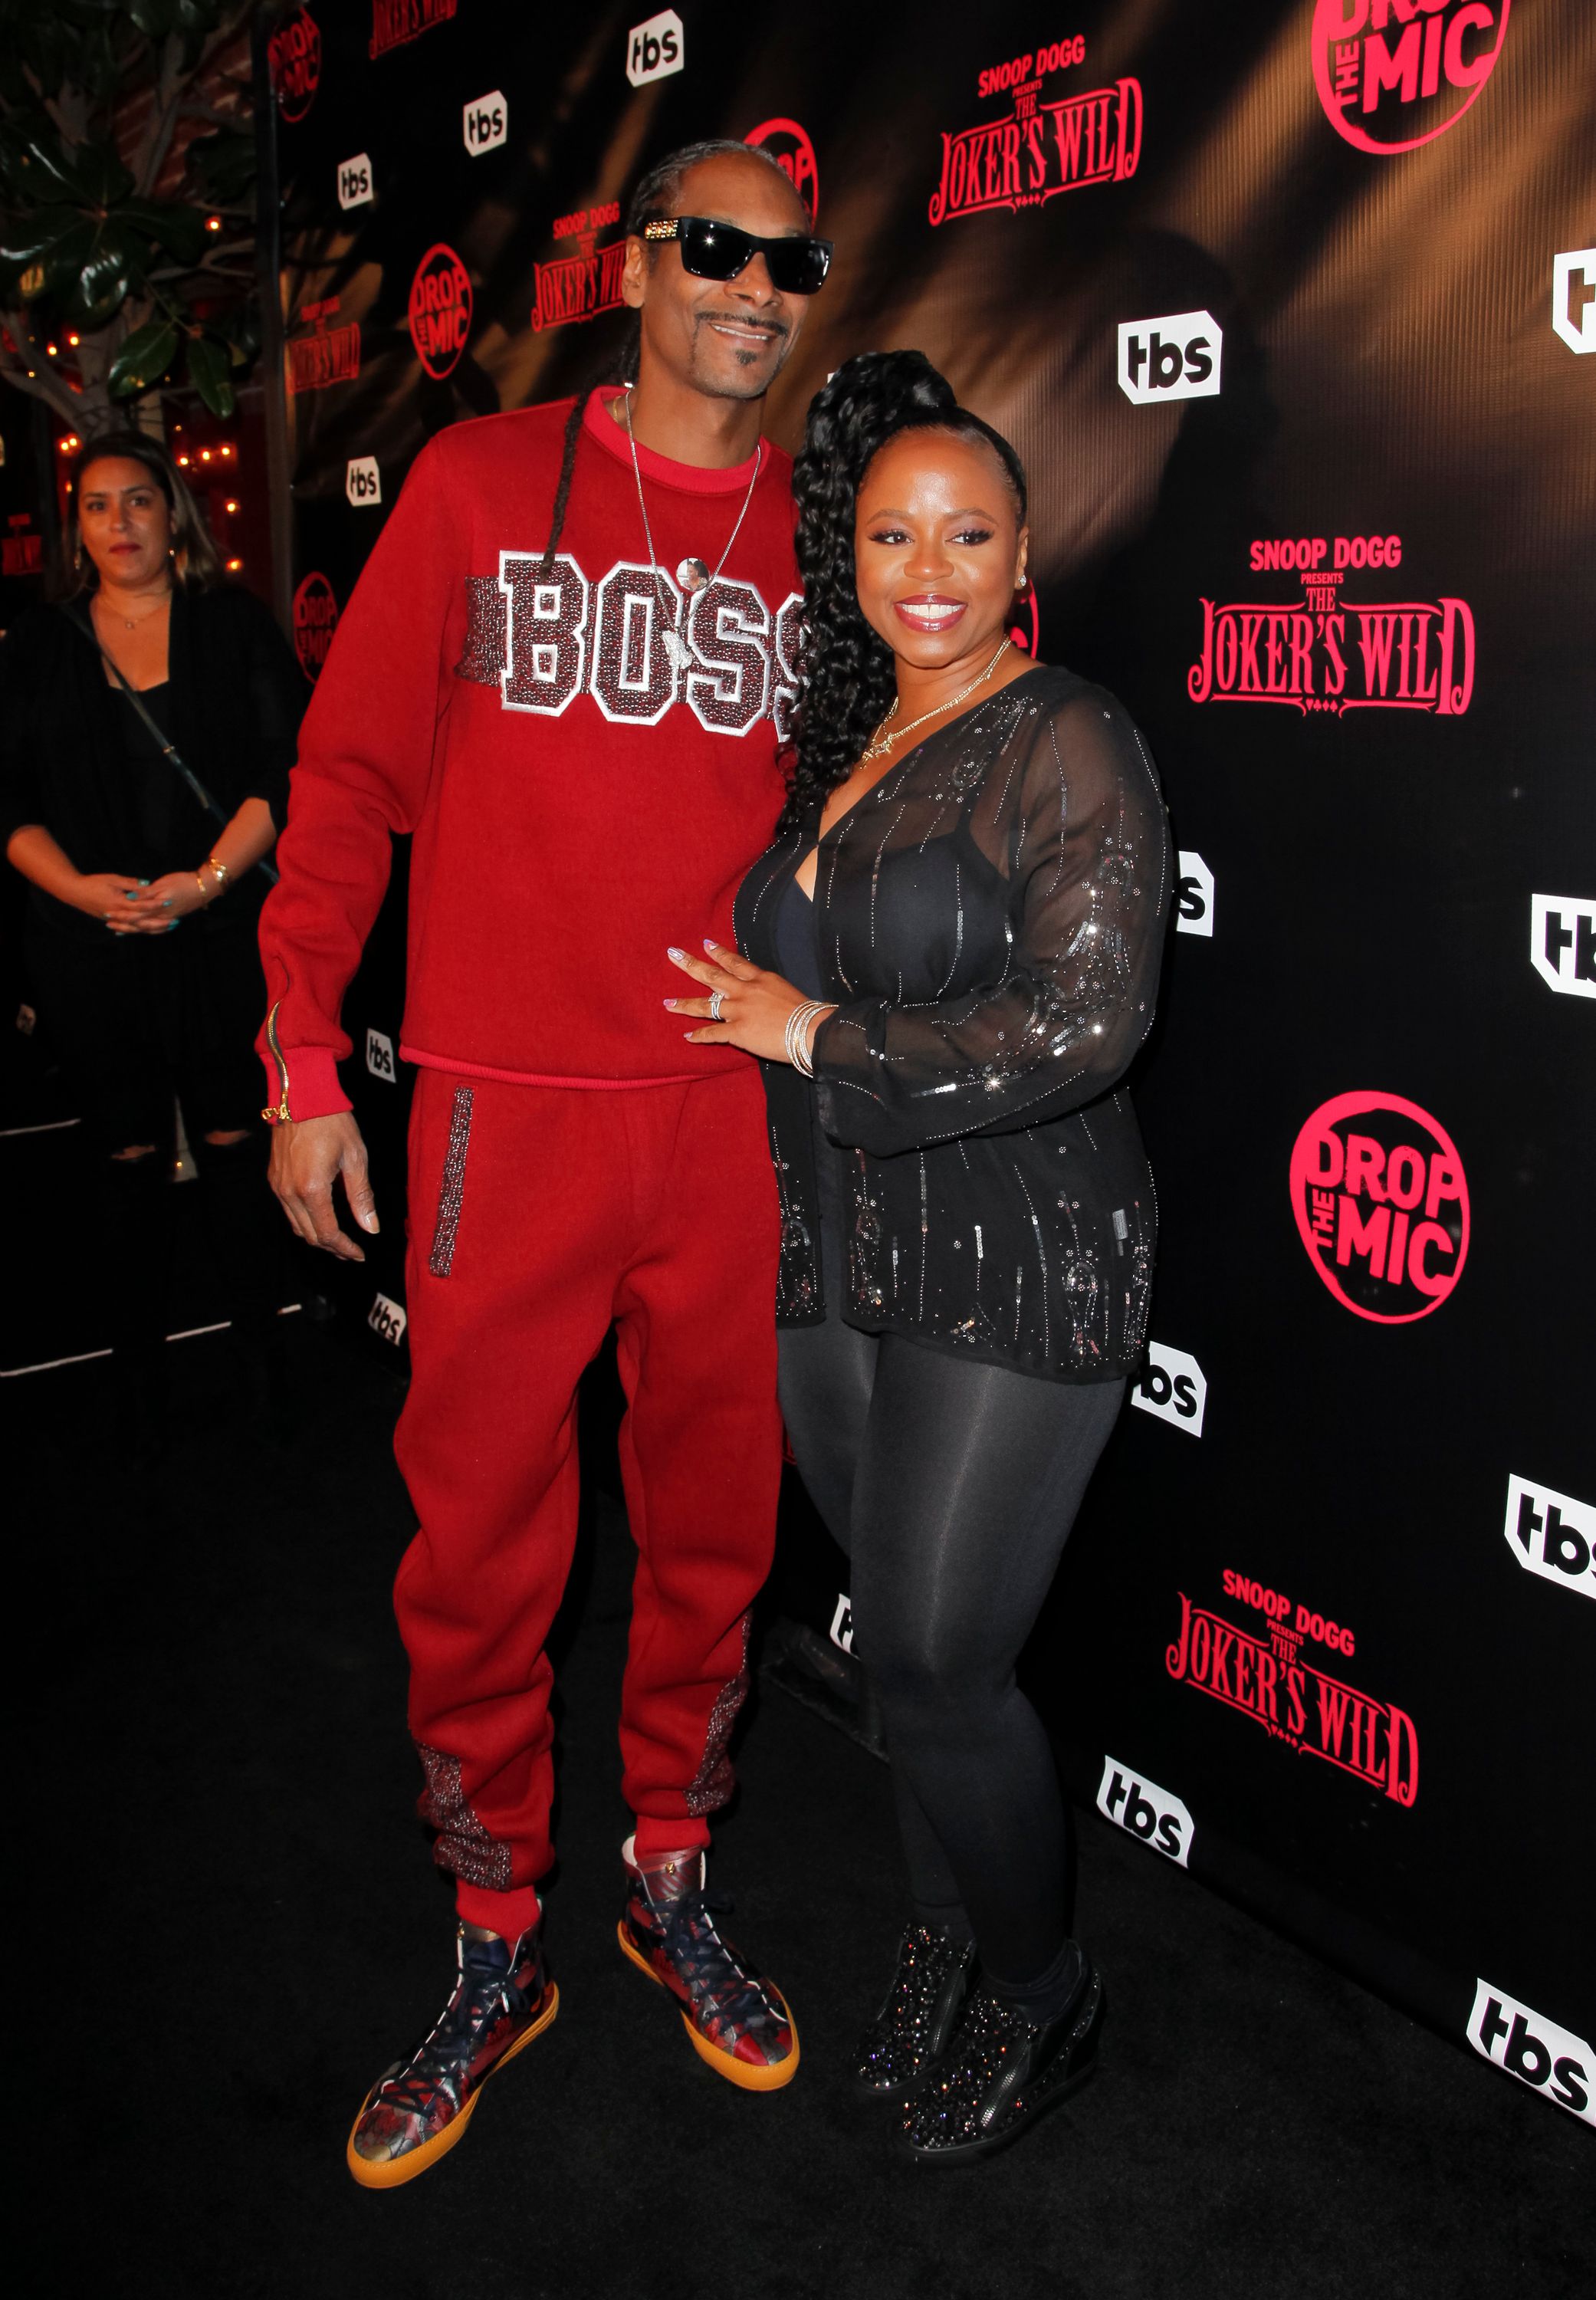 Snoop Dogg and Shante Broadus at the premiere for TBS's 'Drop The Mic' and 'The Joker's Wild' at The Highlight Room on October 11, 2017 | Photo: Getty Images